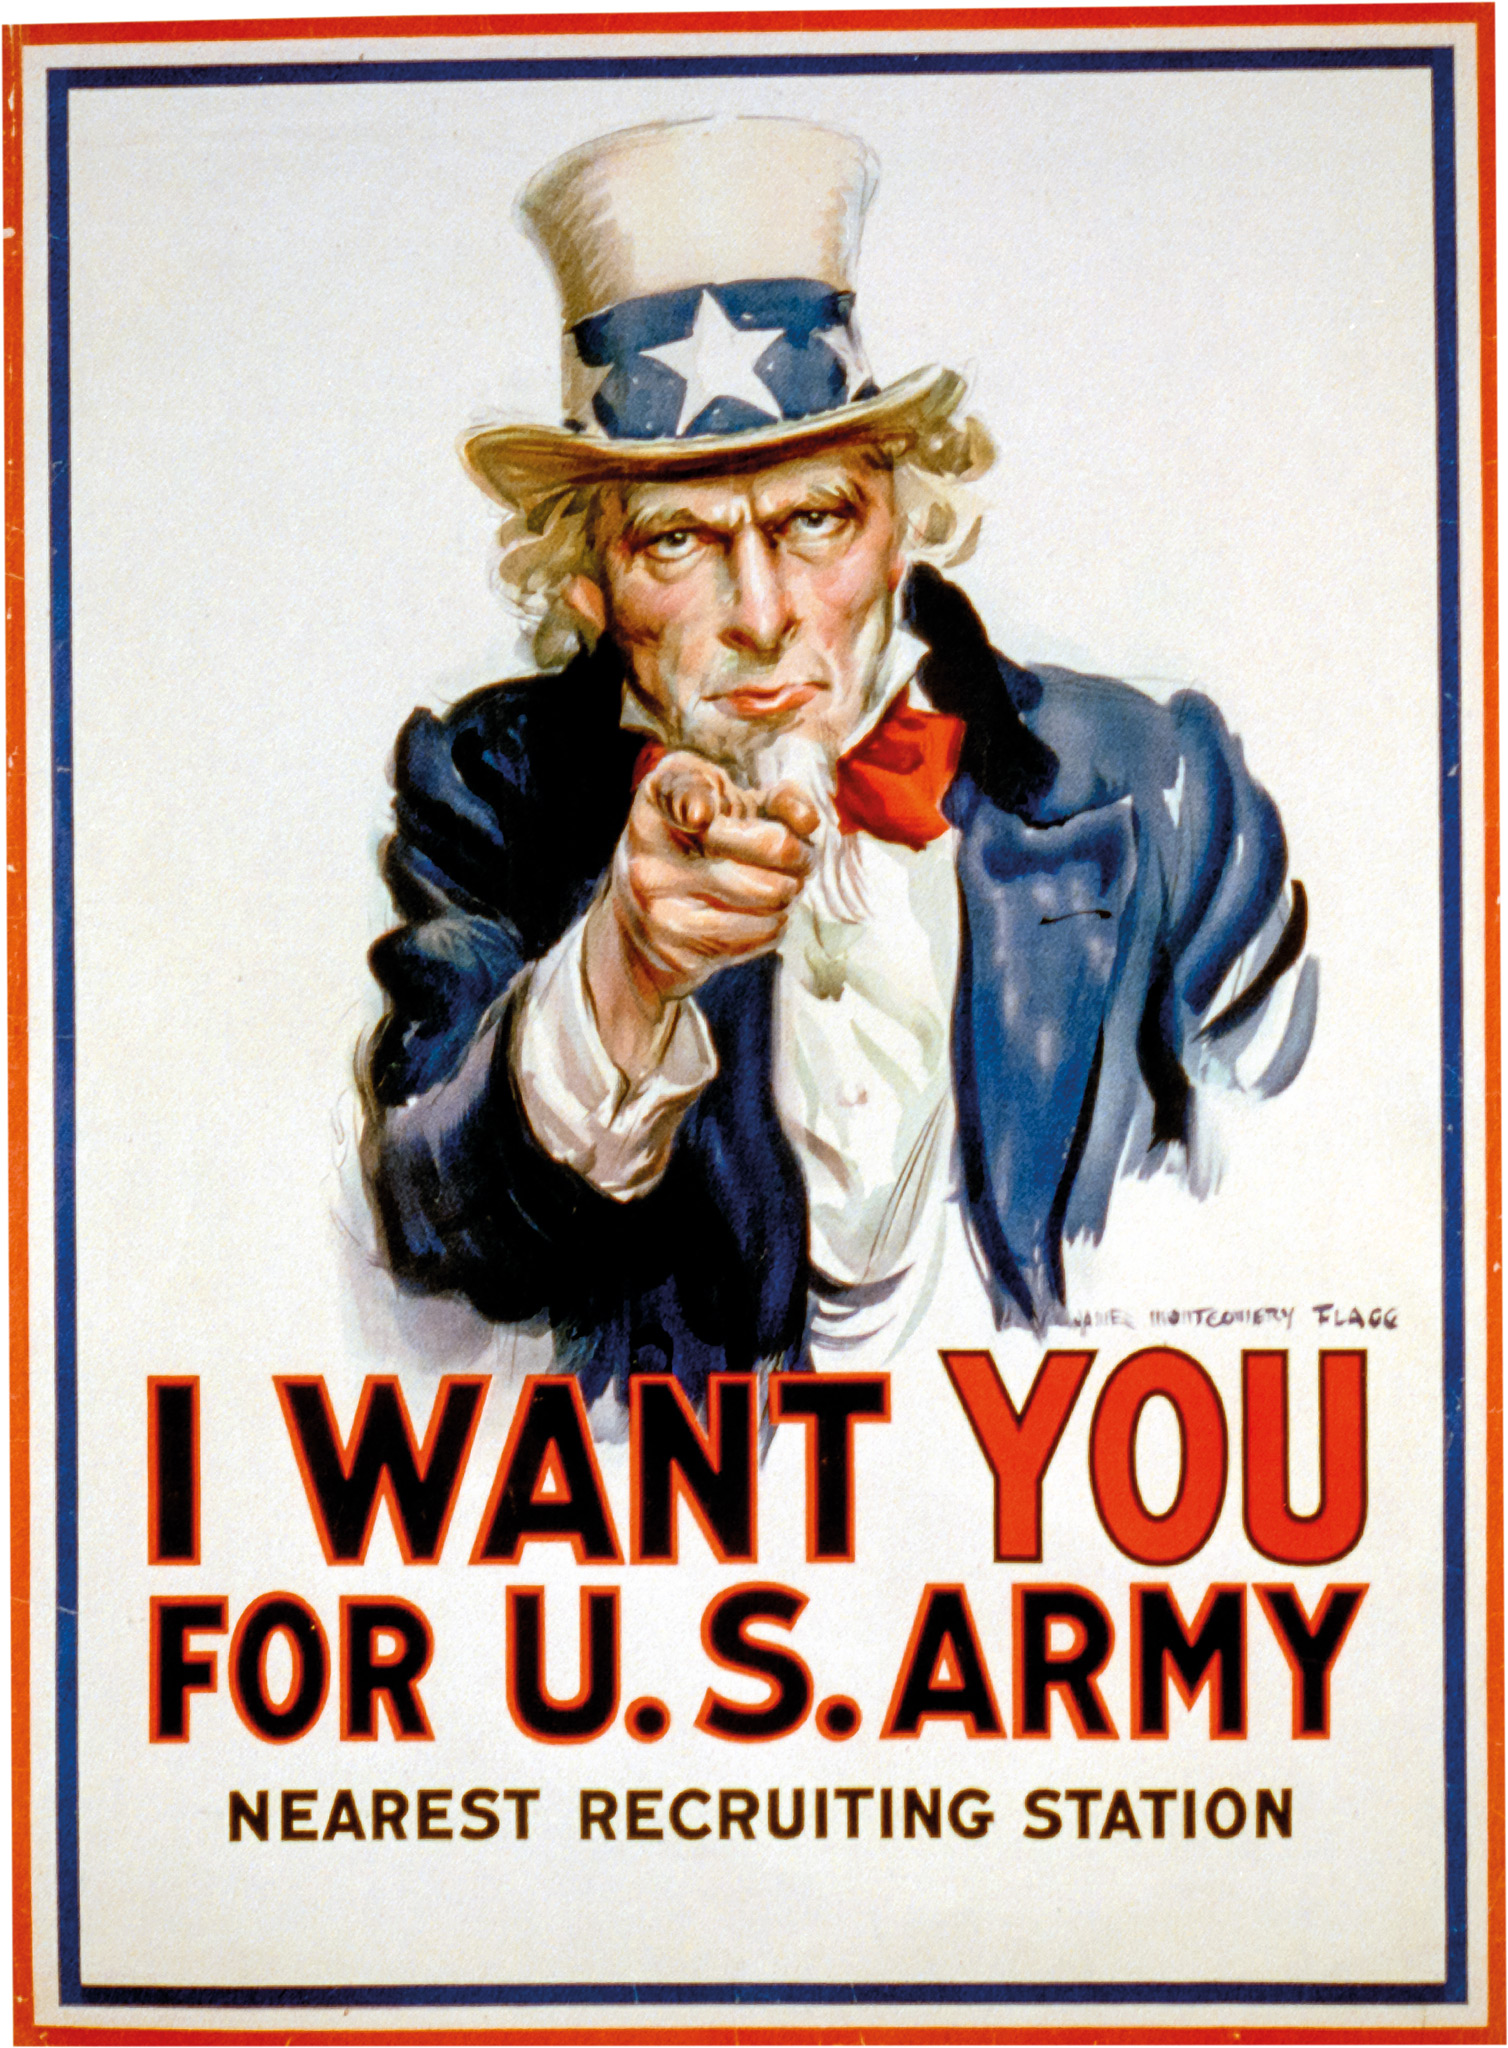 The famous 'I Want You' recruitment poster encouraged Americans to join the effort